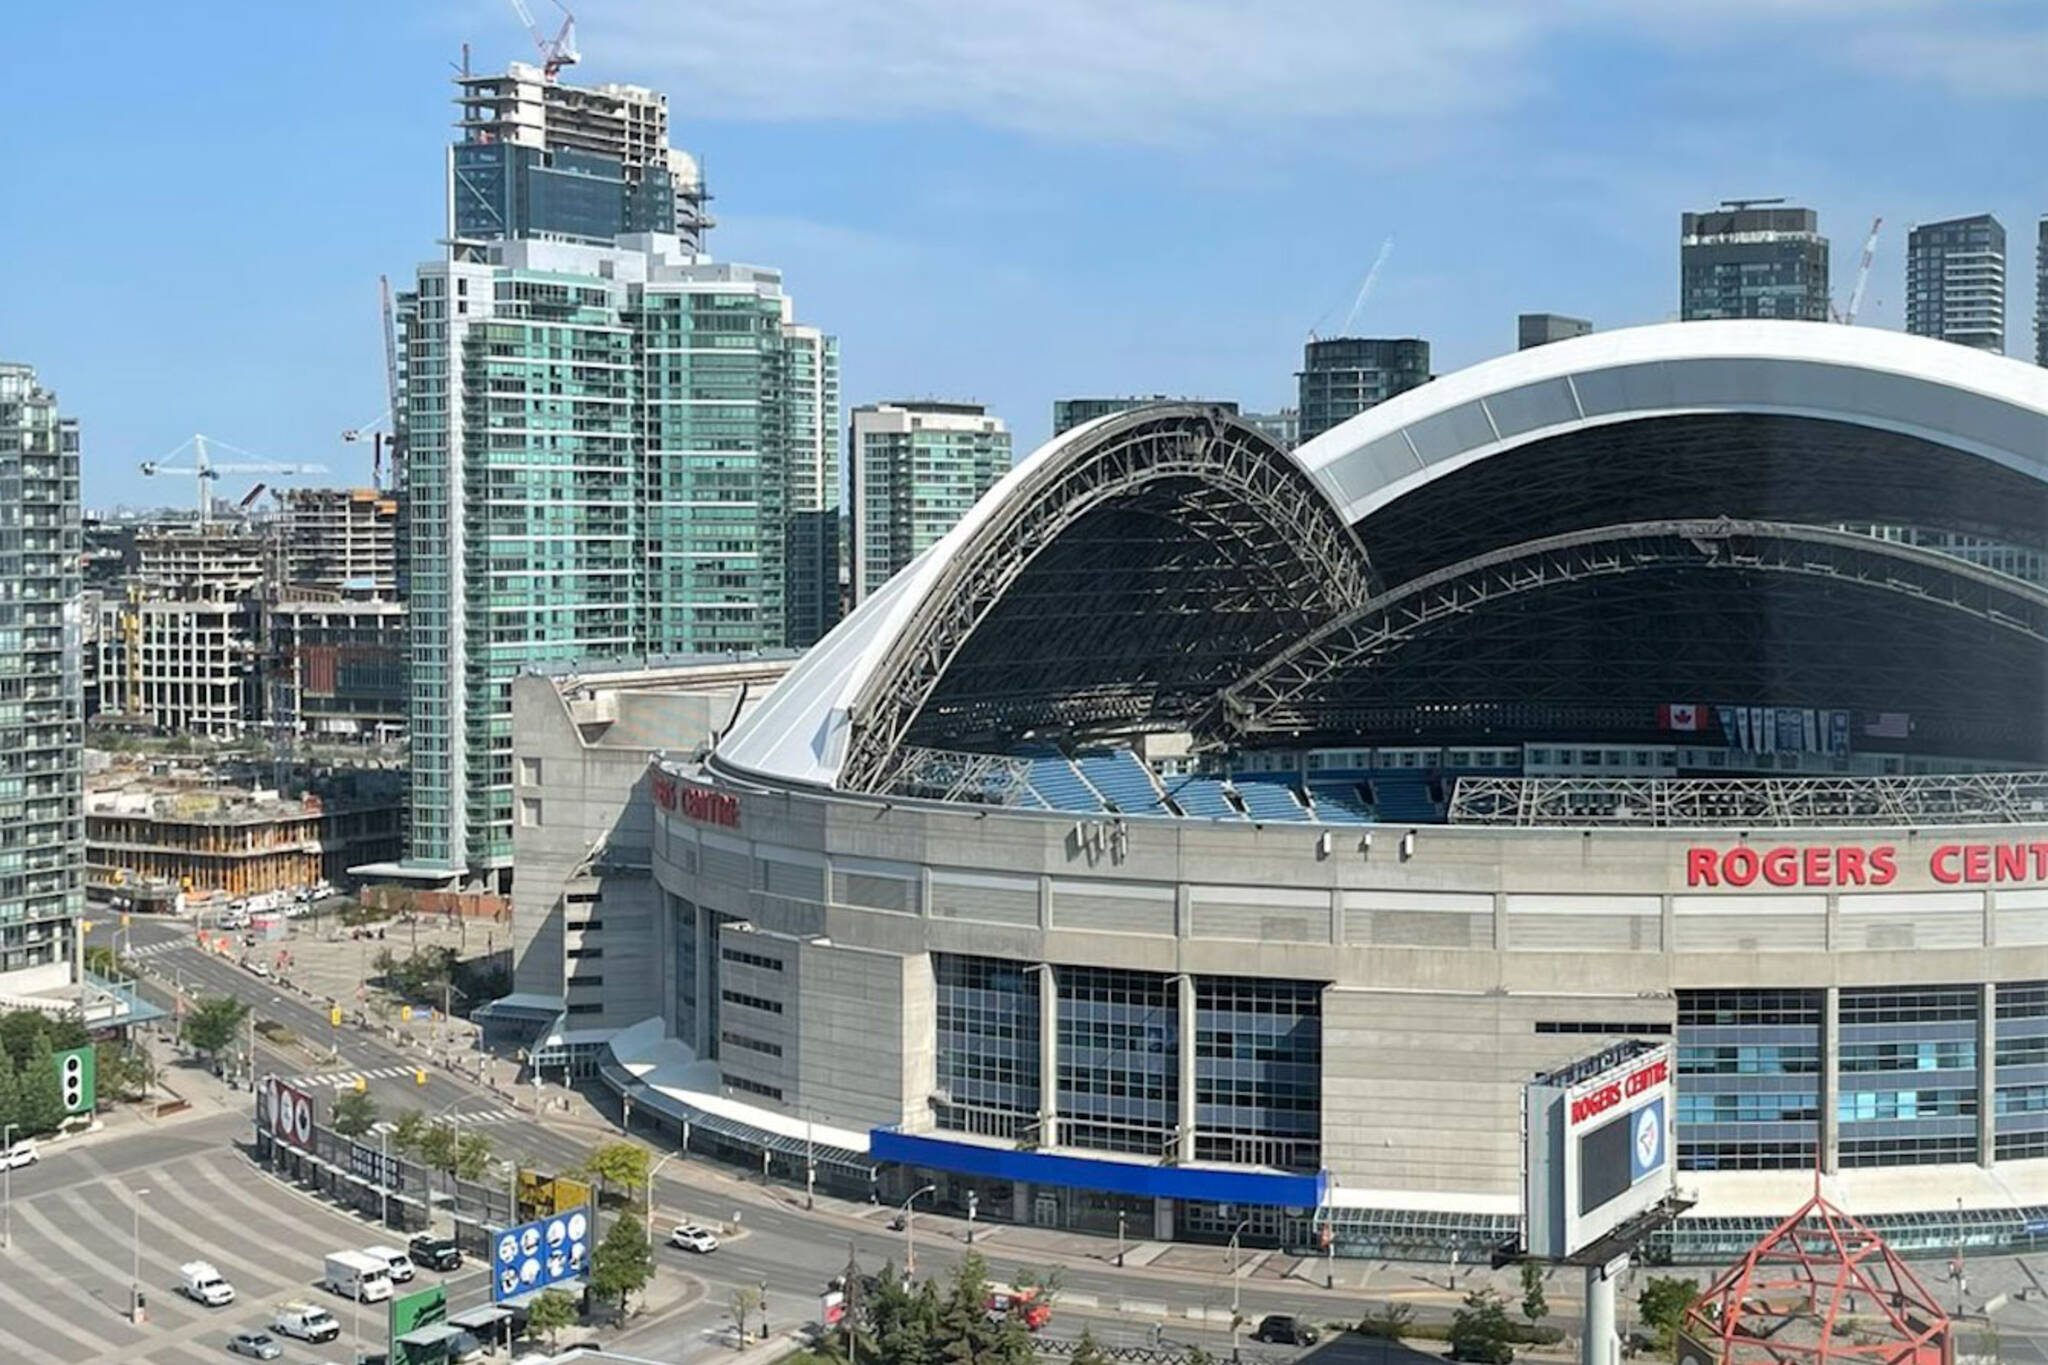 The roof at the Rogers Centre is open and people have thoughts on